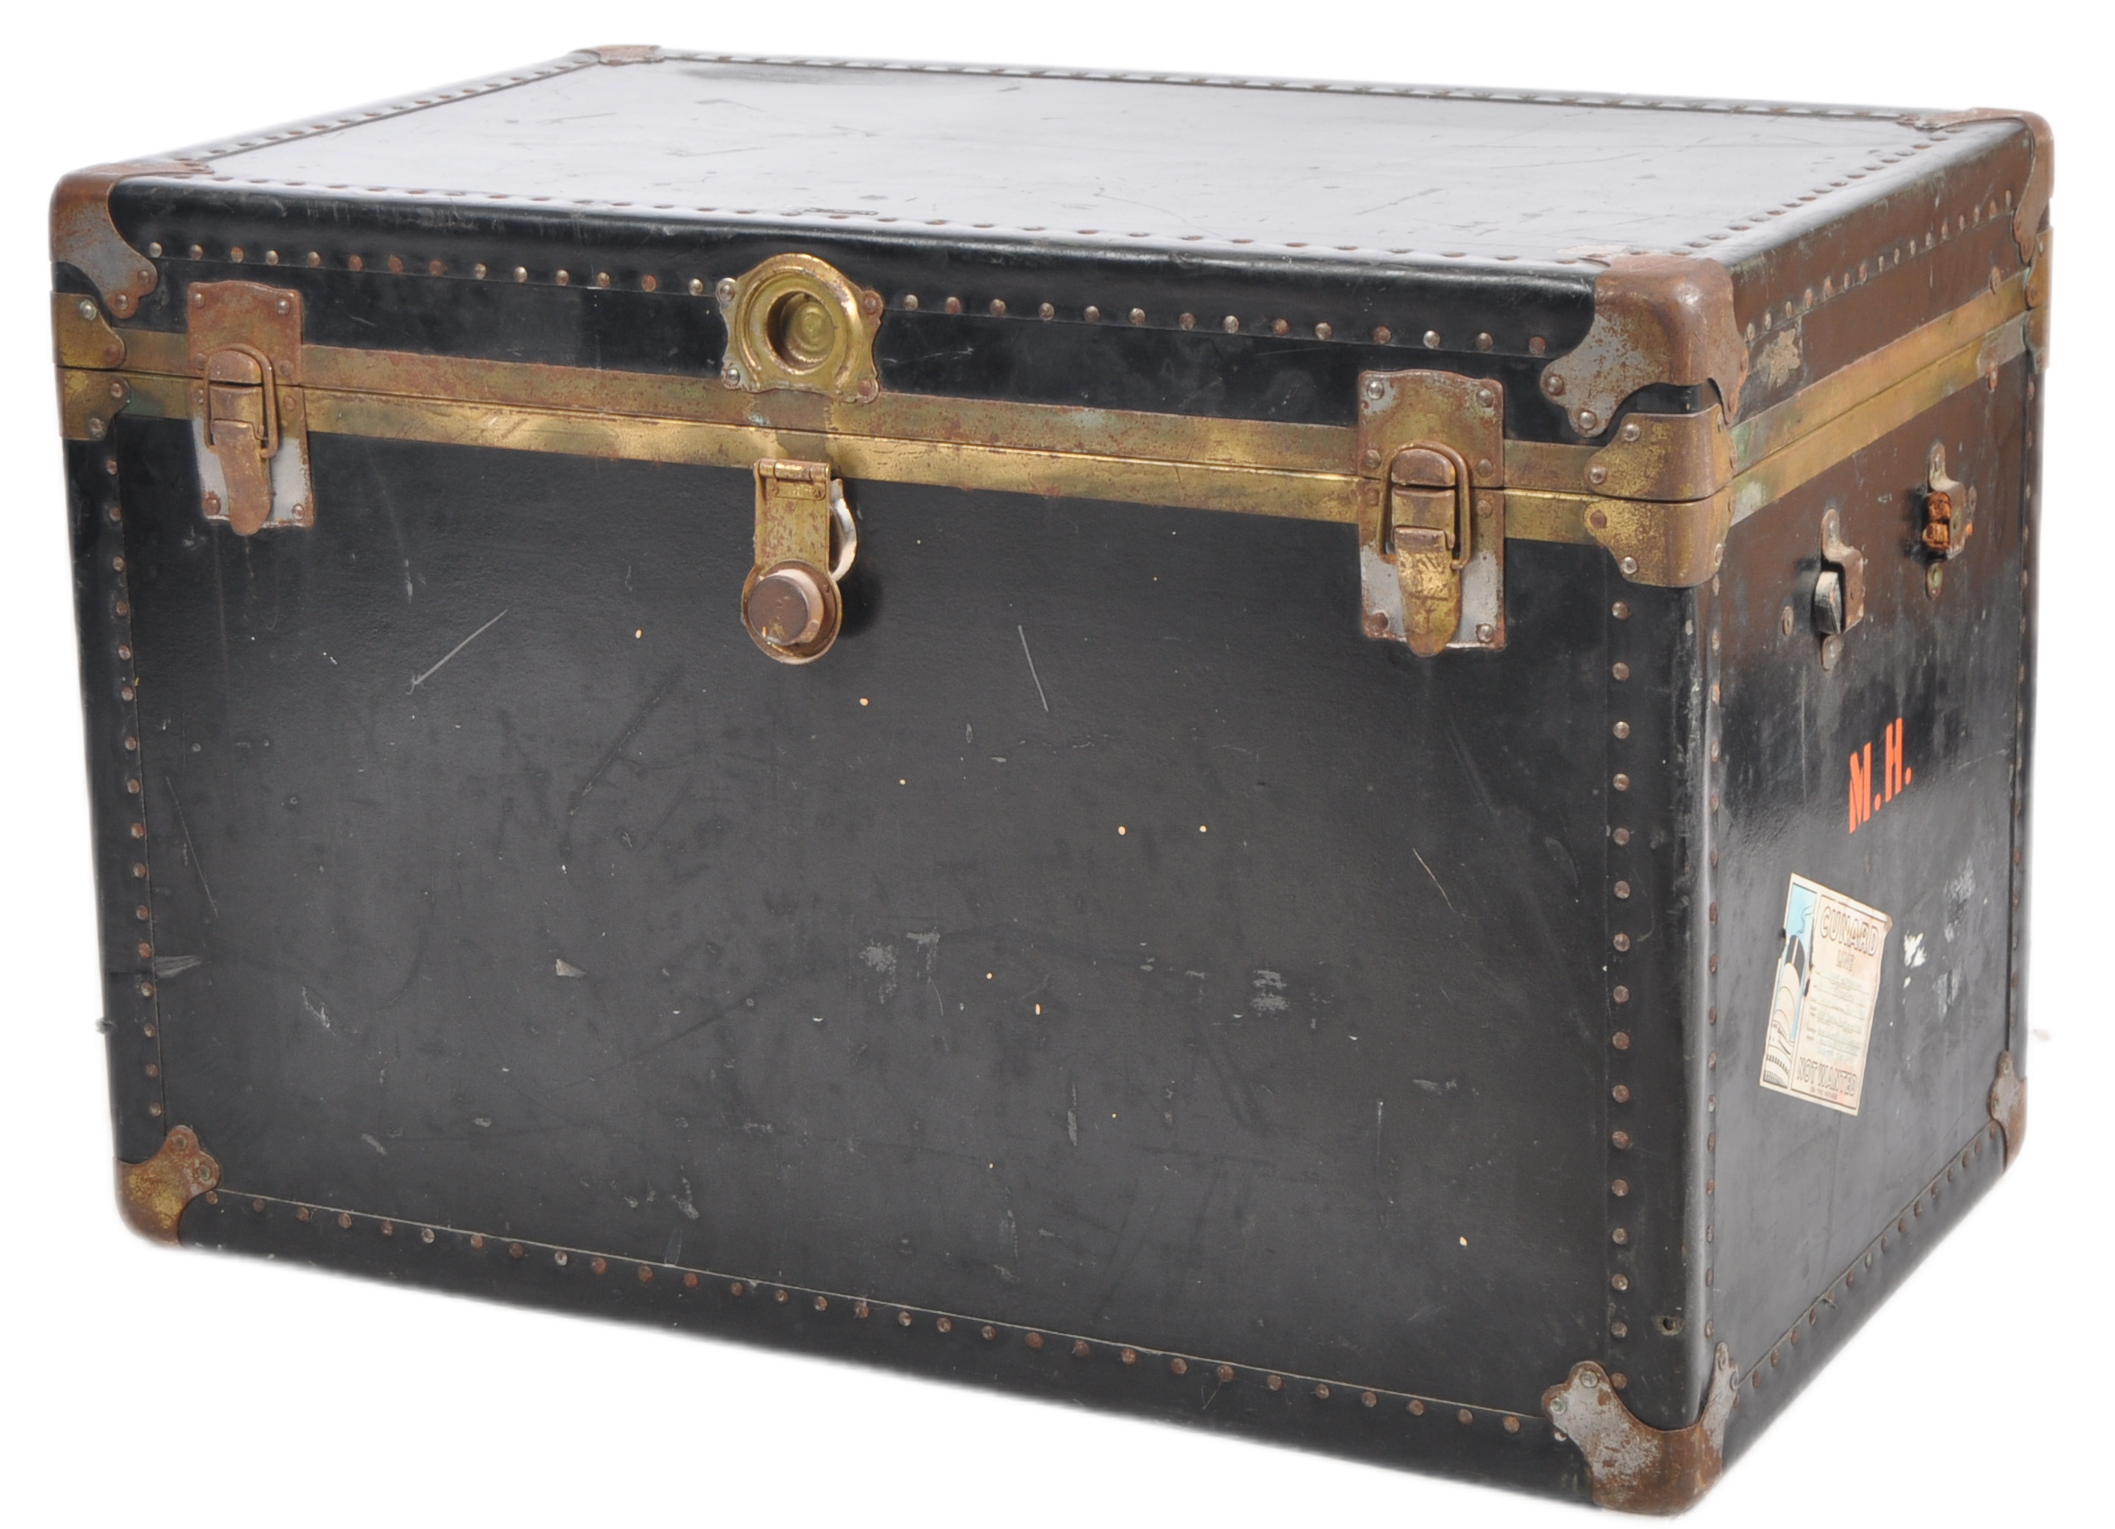 PAIR OF 1920s METAL BOUND STEAMER TRUNK CHEST SIDE TABLES - Image 6 of 12